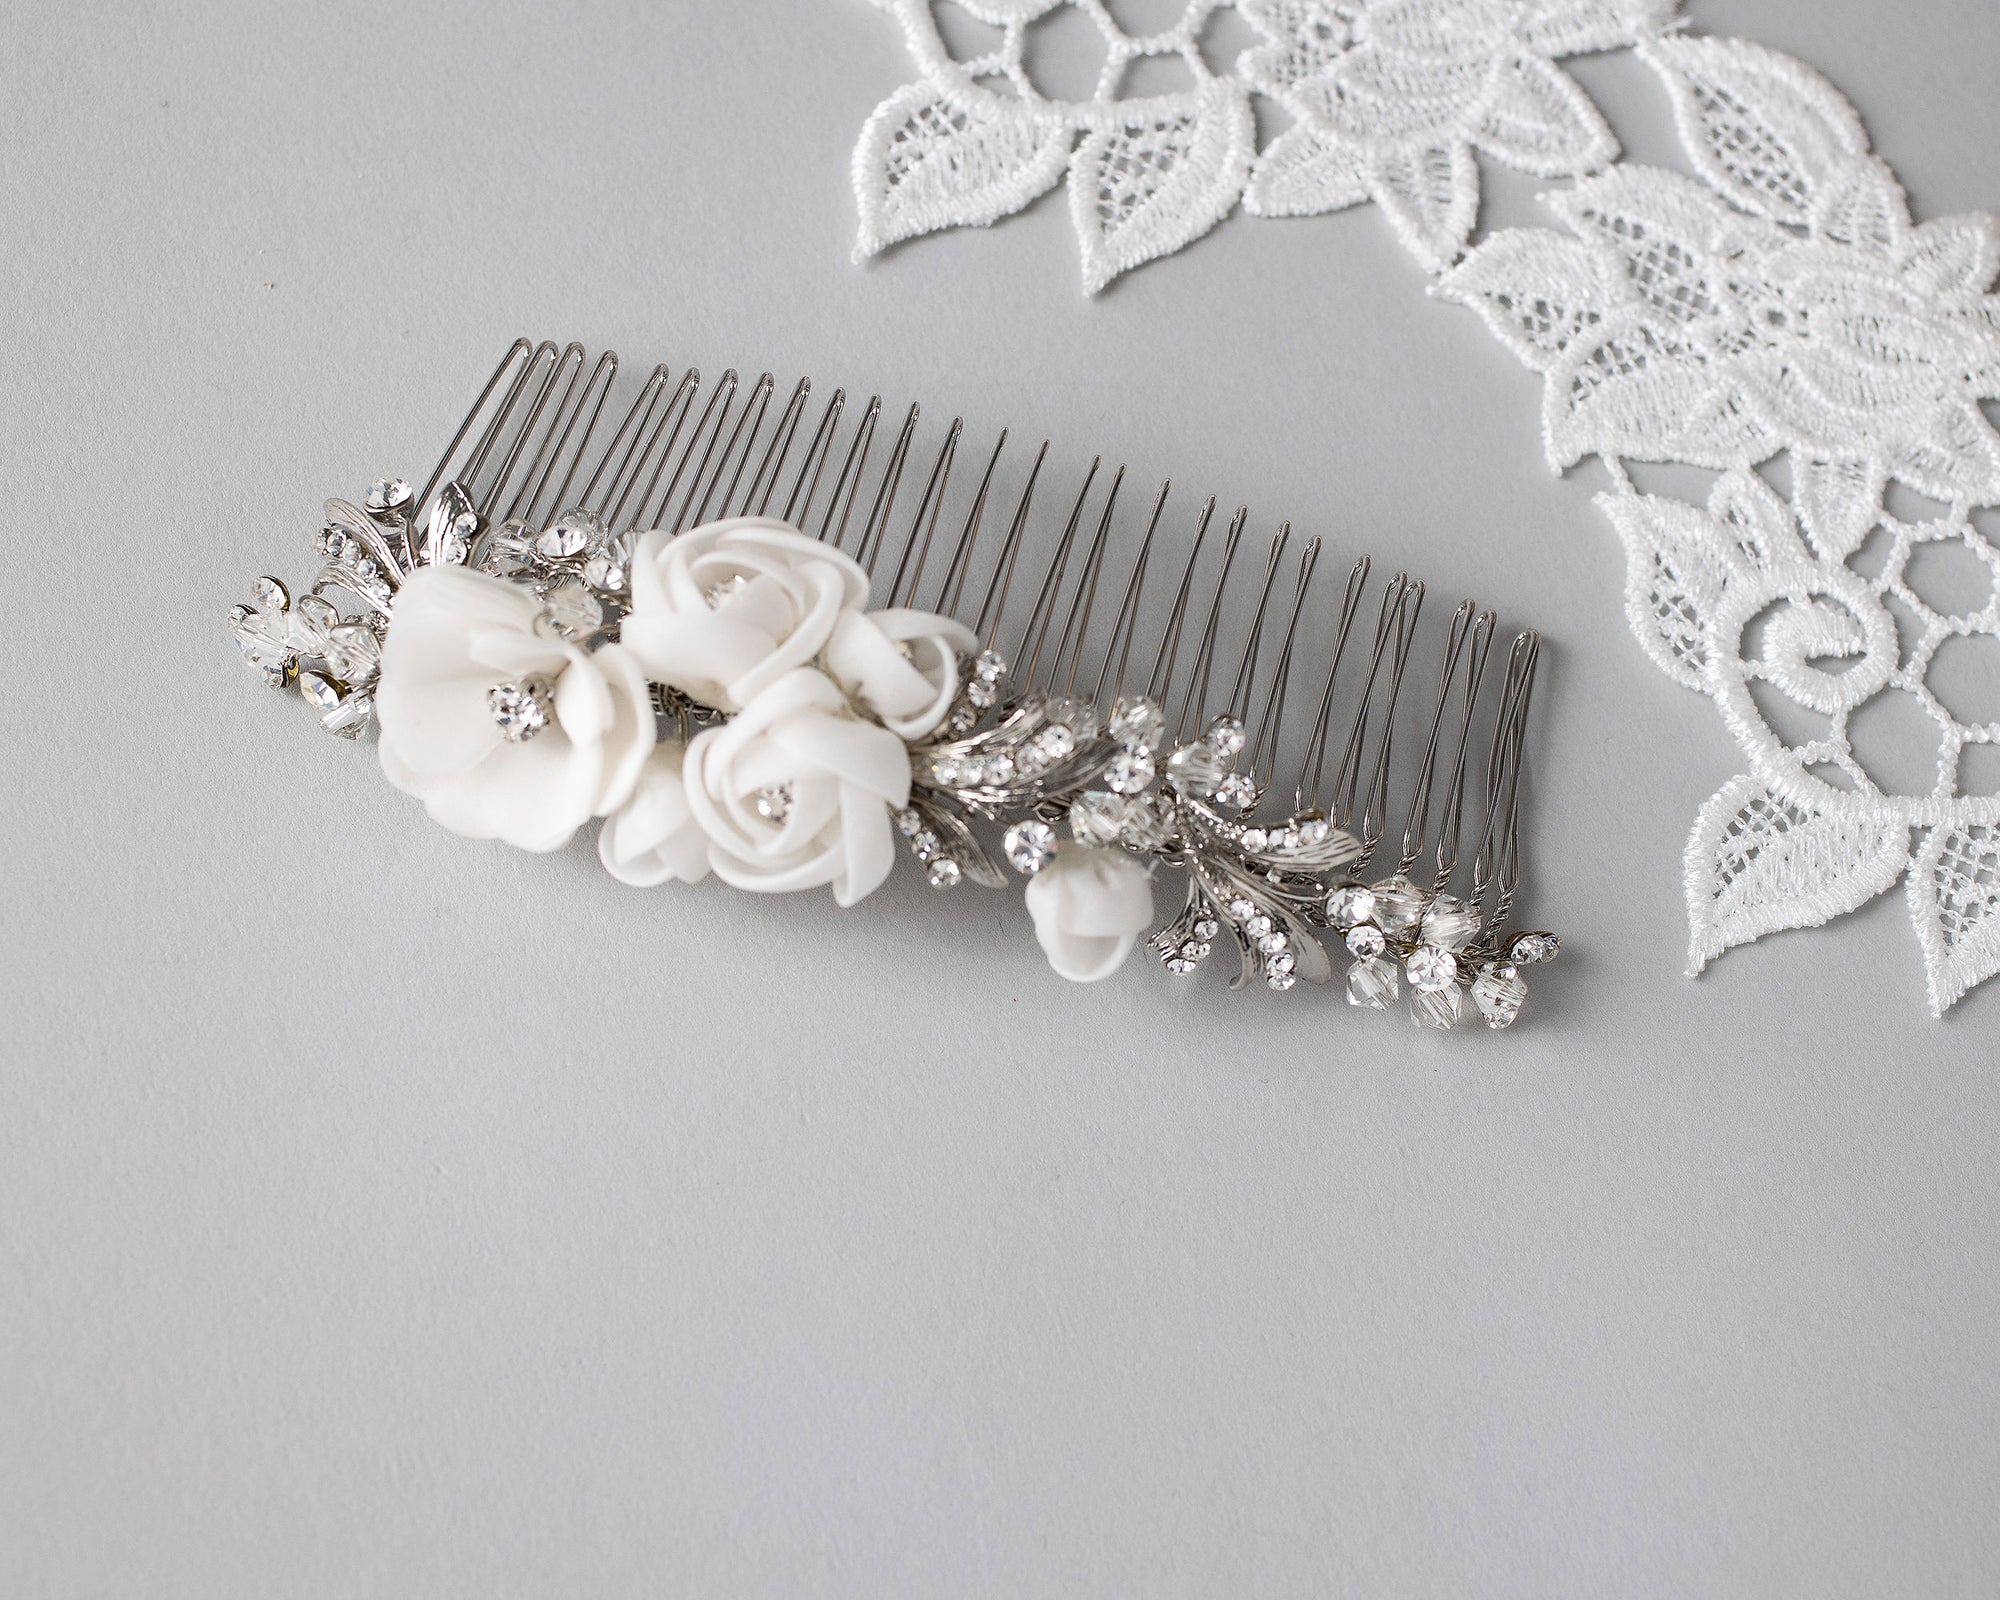 Tiara Comb of Ivory Flowers and Crystals